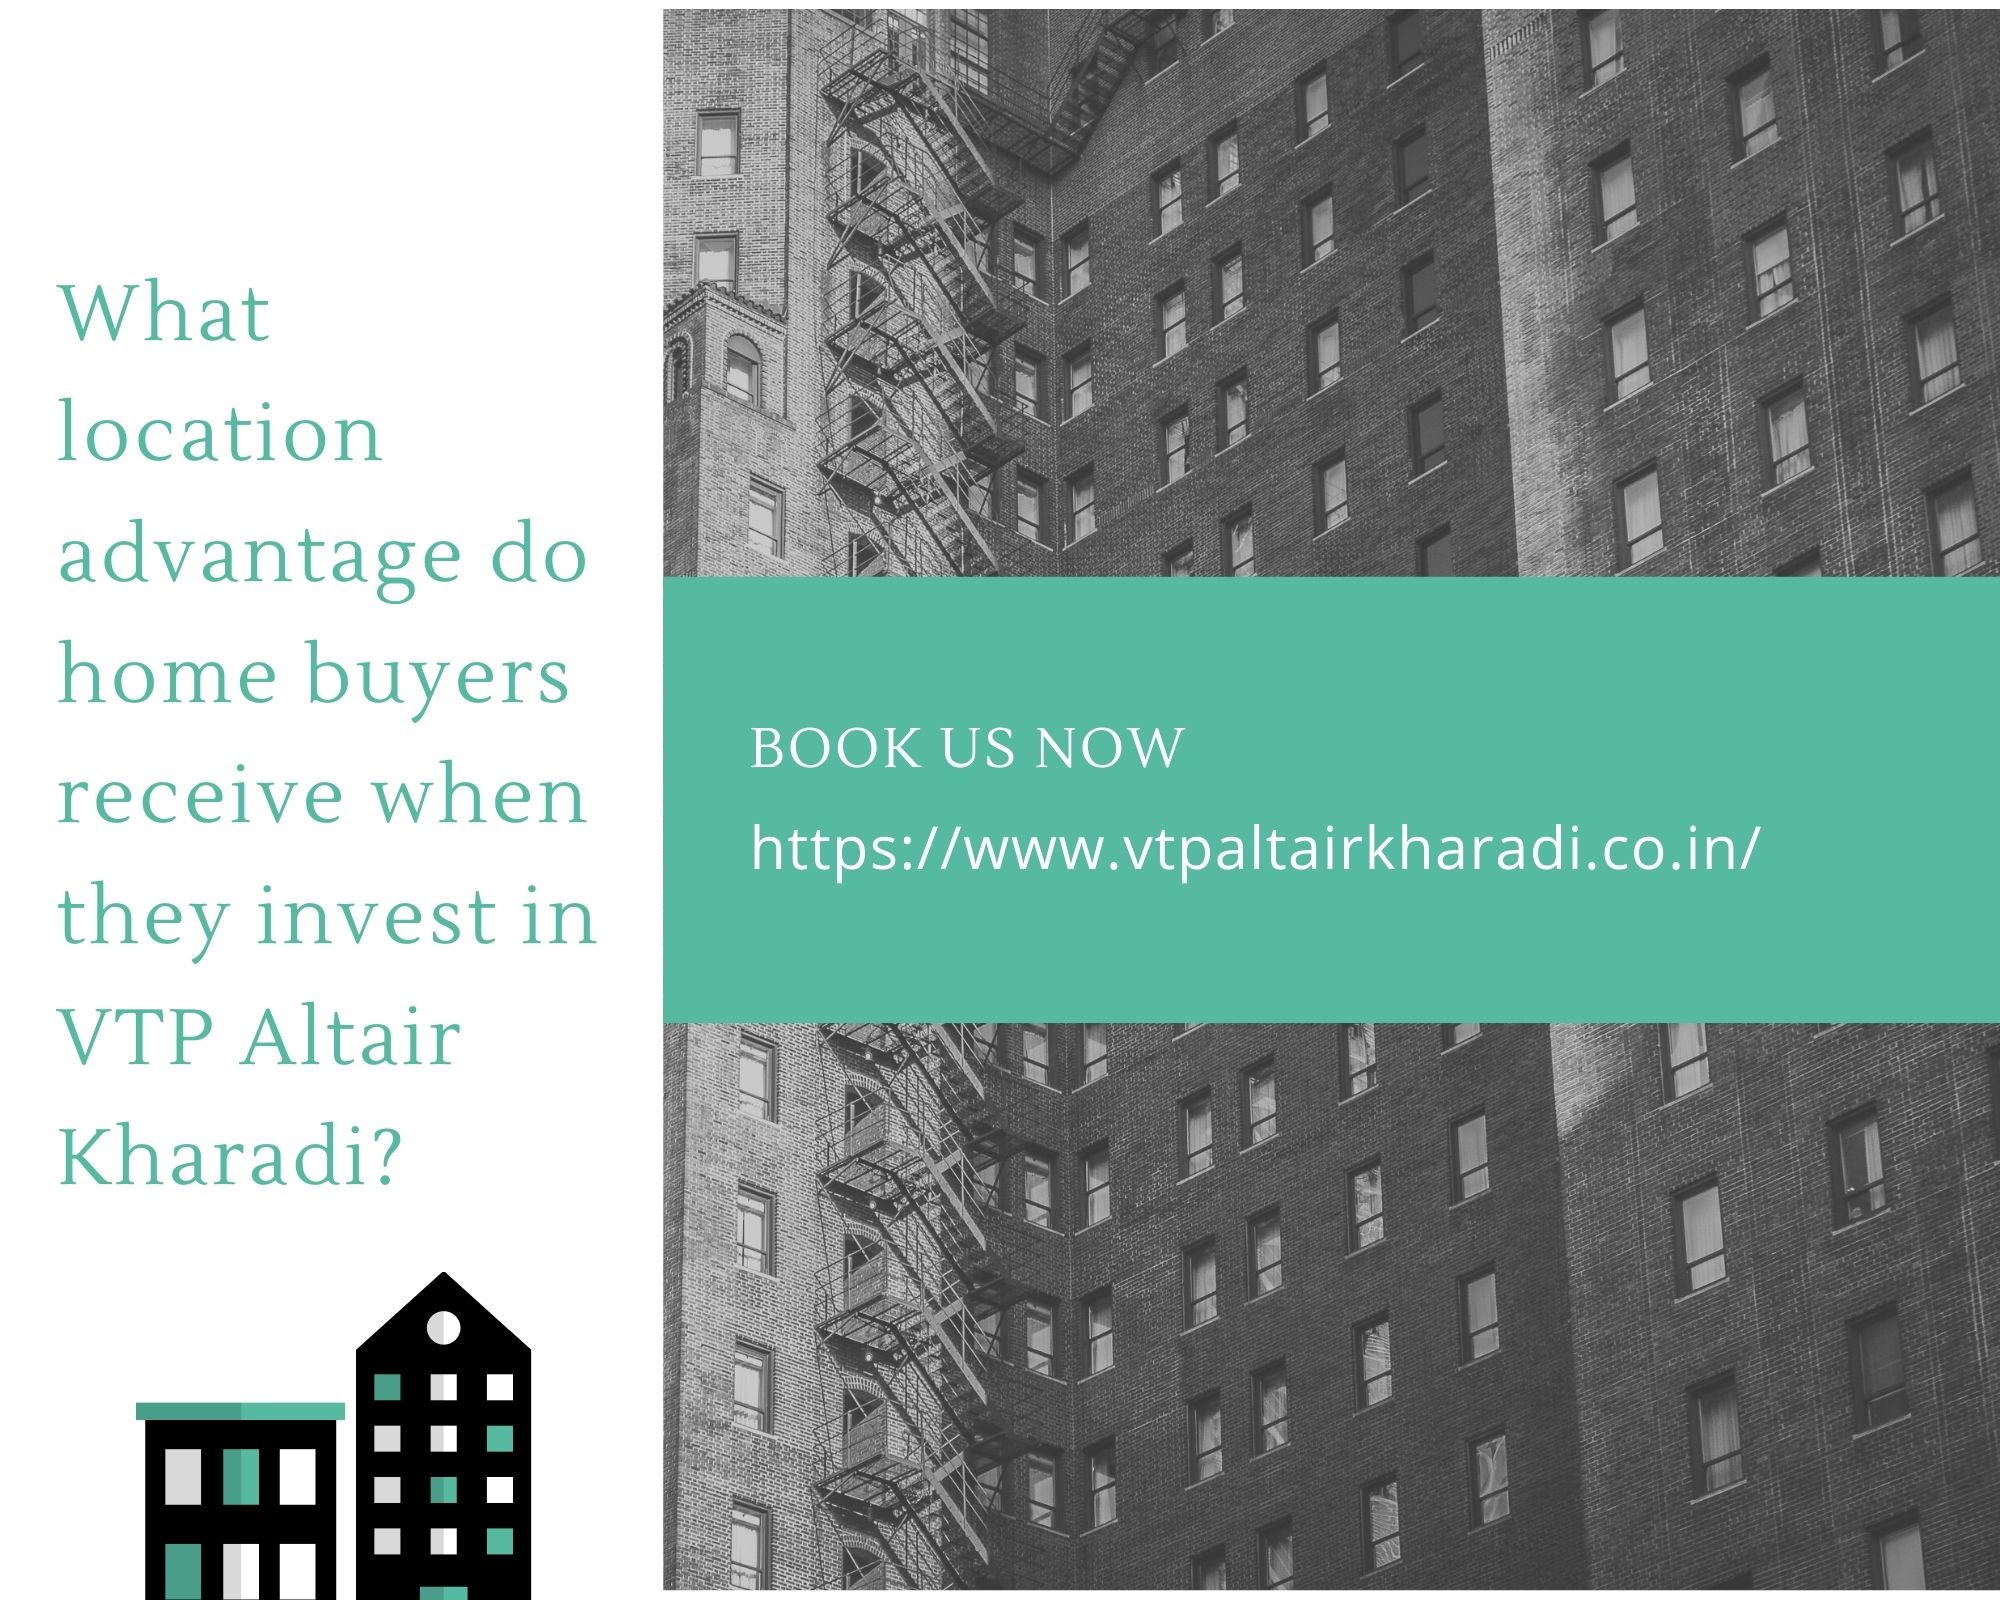 What location advantage do home buyers receive when they invest in VTP Altair Kharadi?